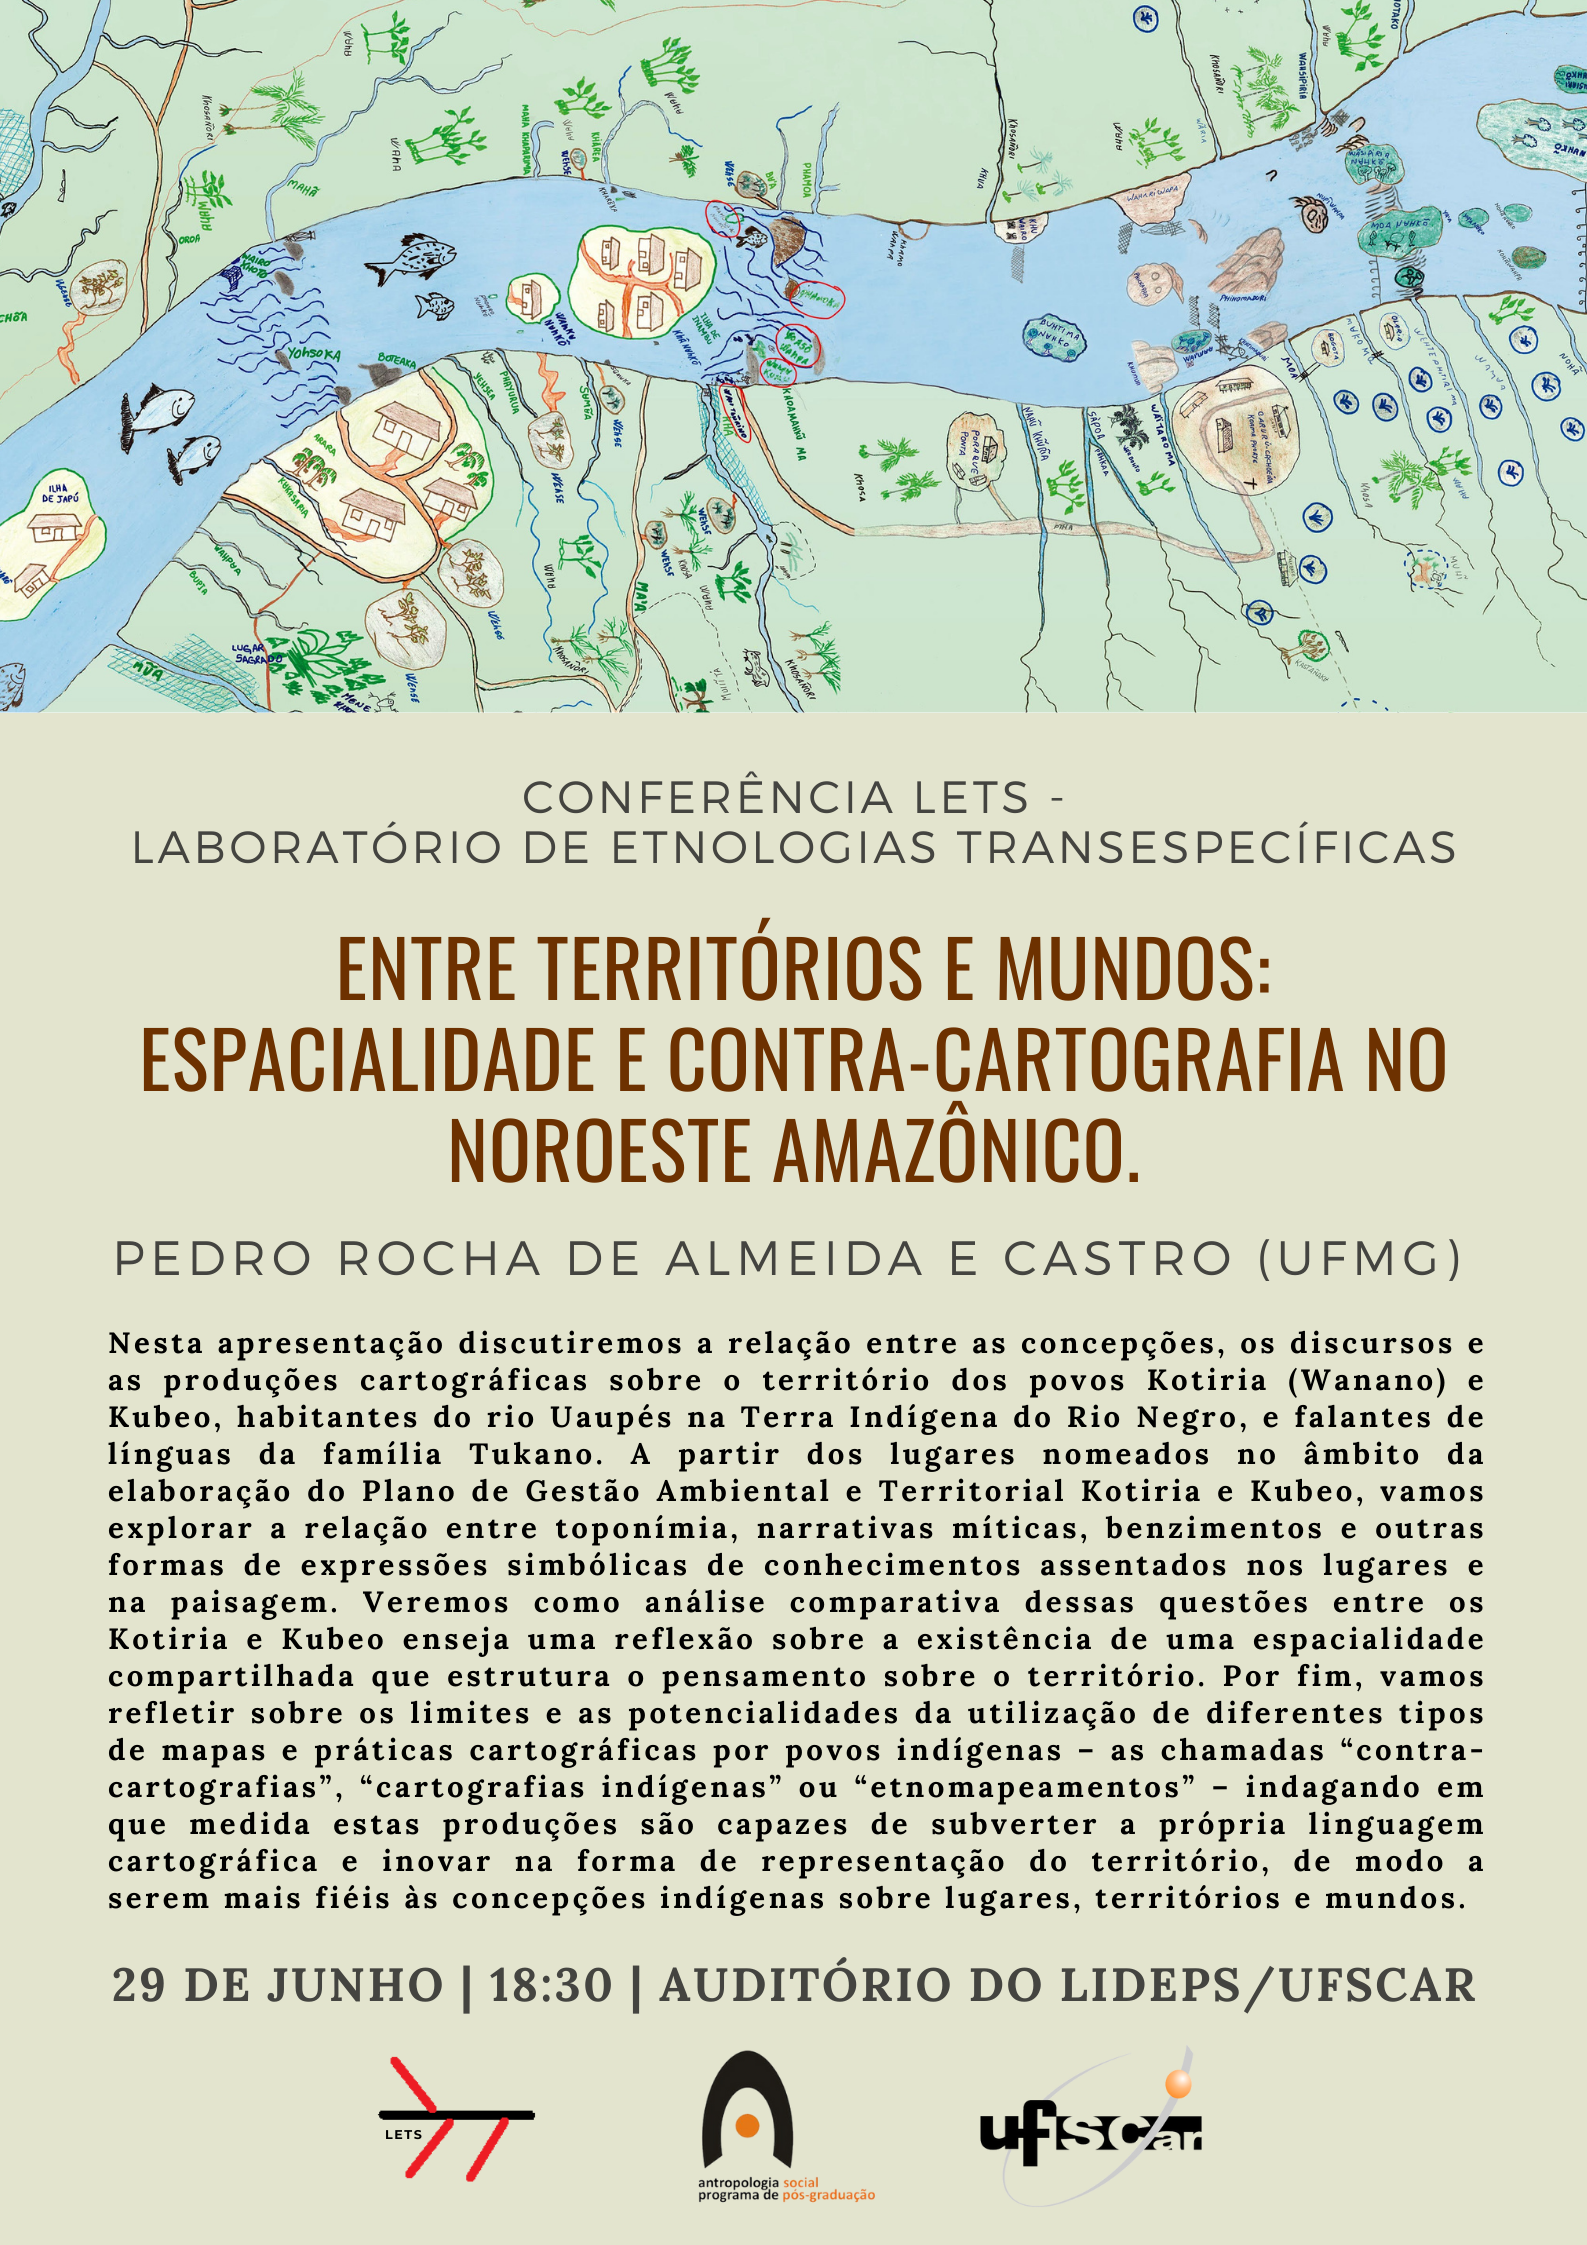 LETS Conference (Laboratory of Transspecific Ethnologies) - Between territories and worlds: spatiality and counter-cartography in the Northwest Amazon, with Pedro Rocha de Almeida e Castro (UFMG).